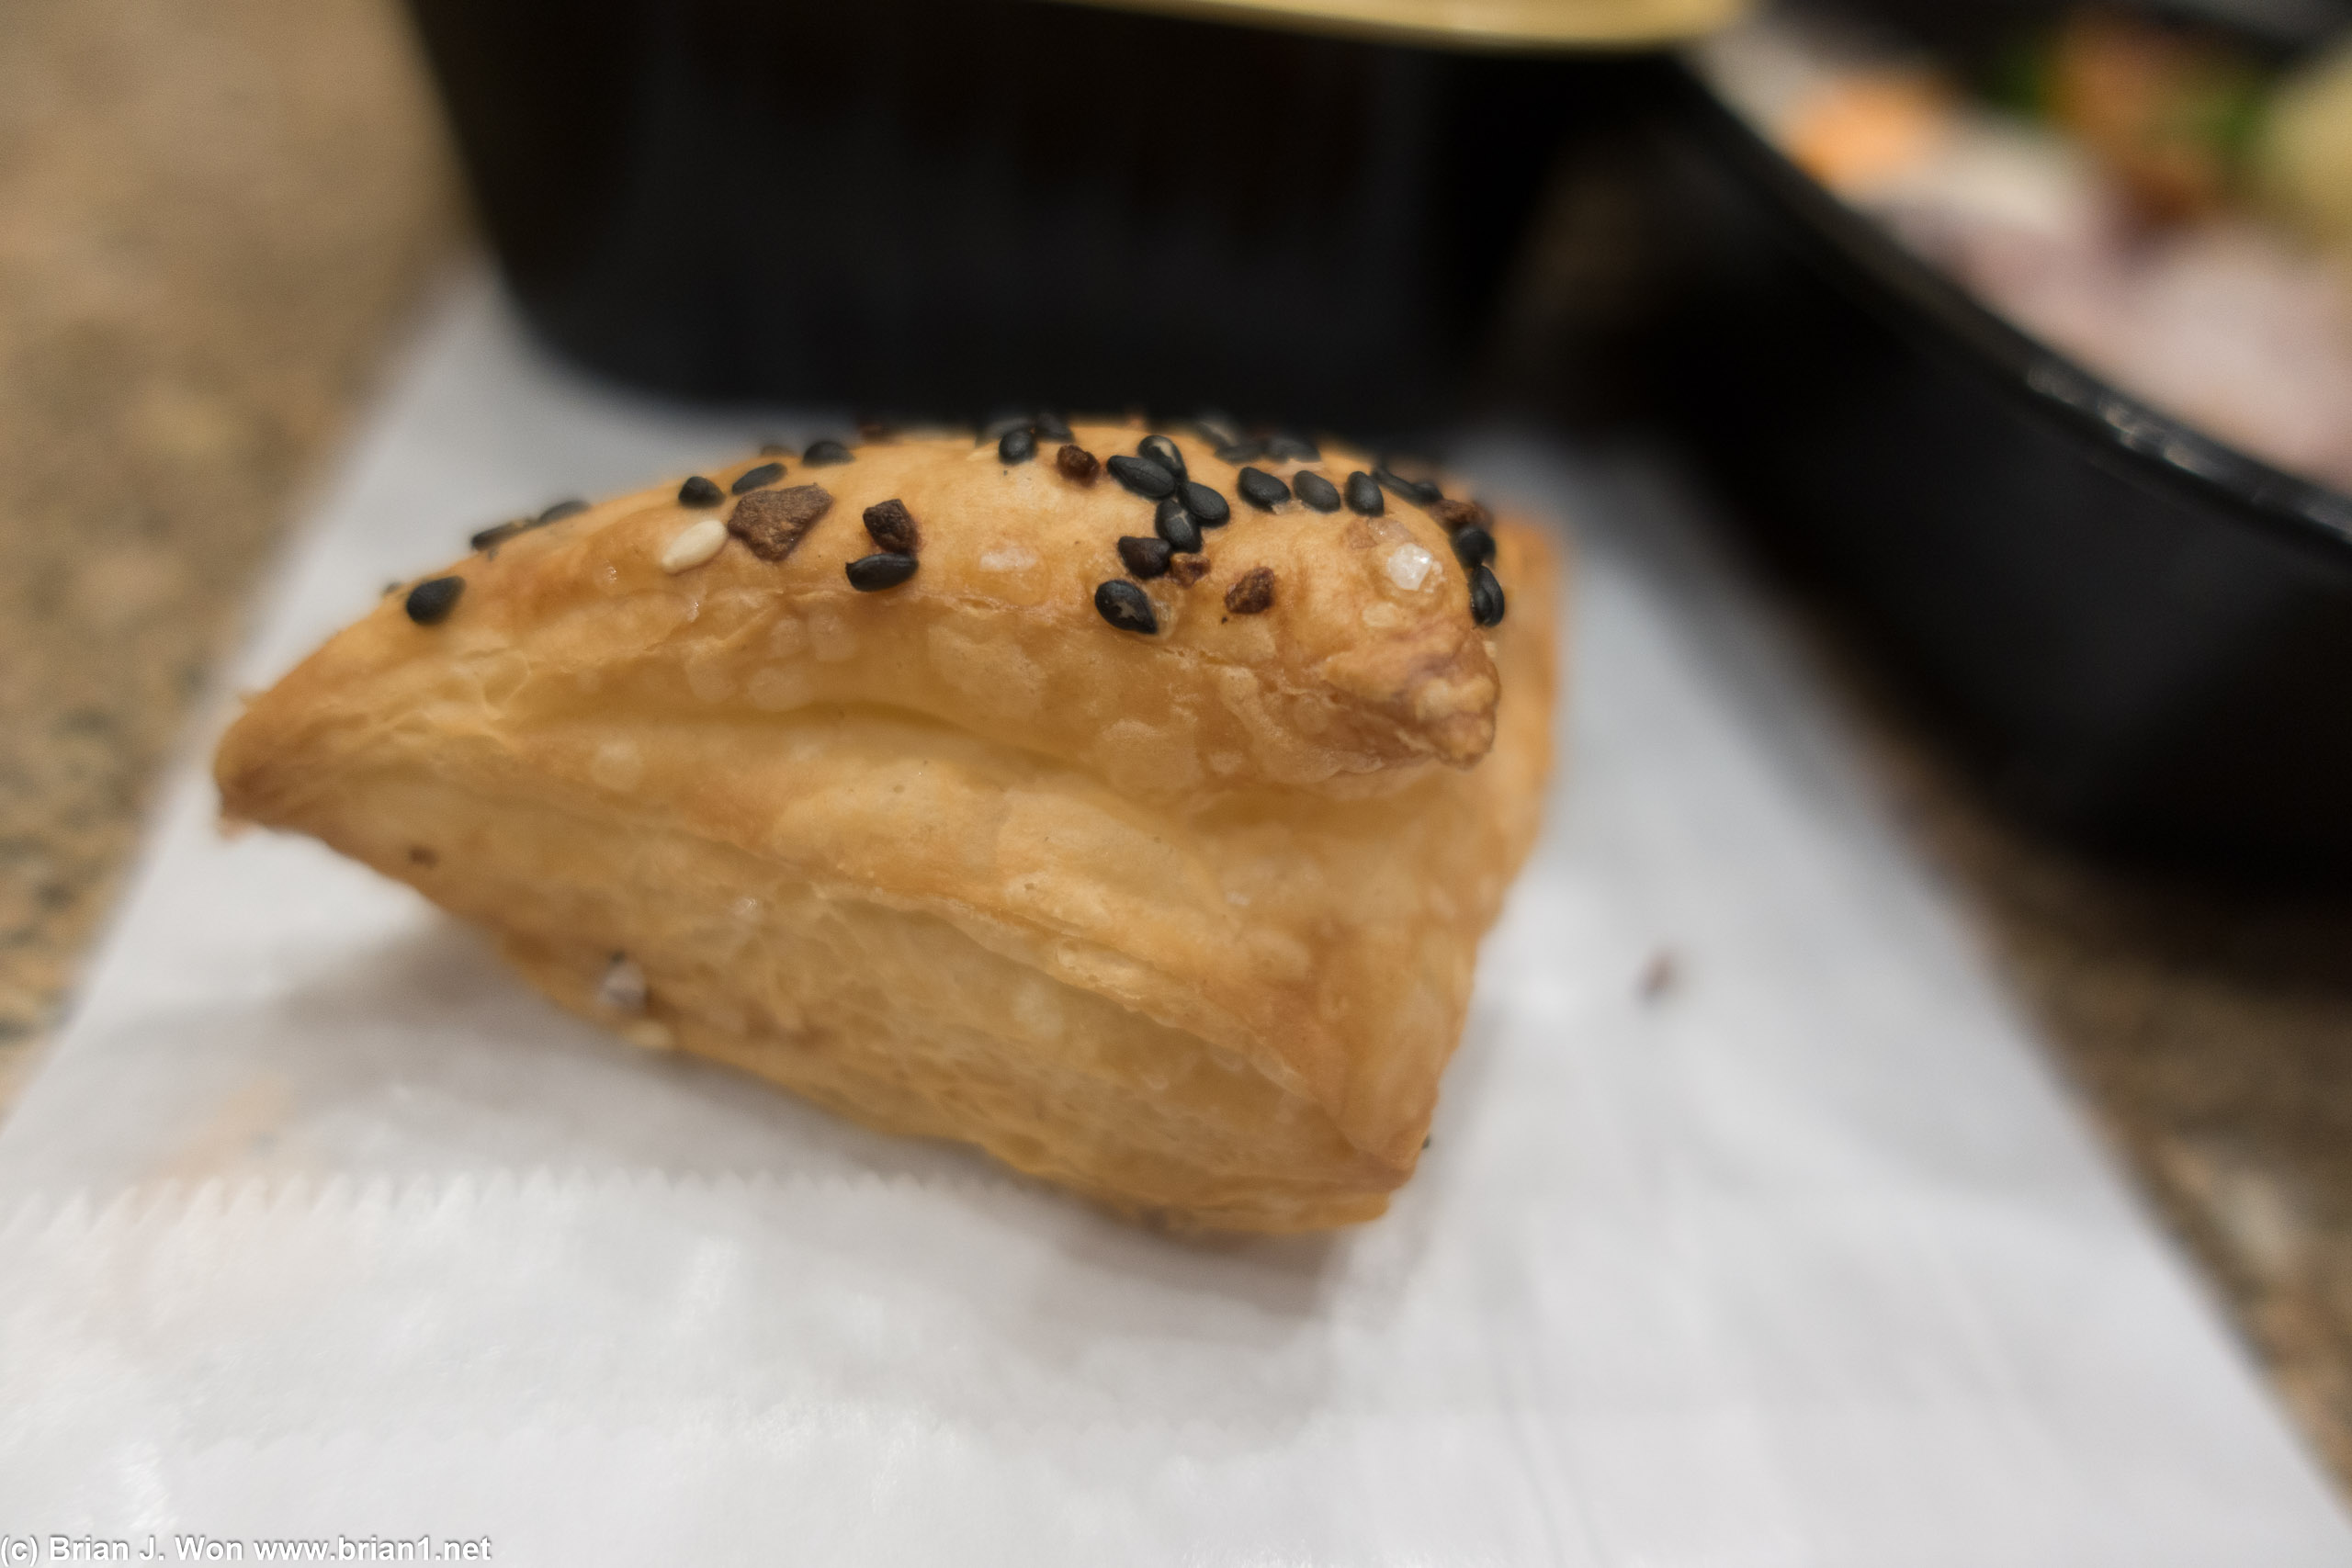 Black sesame puff pastry. Quite mild, meant for the soup.